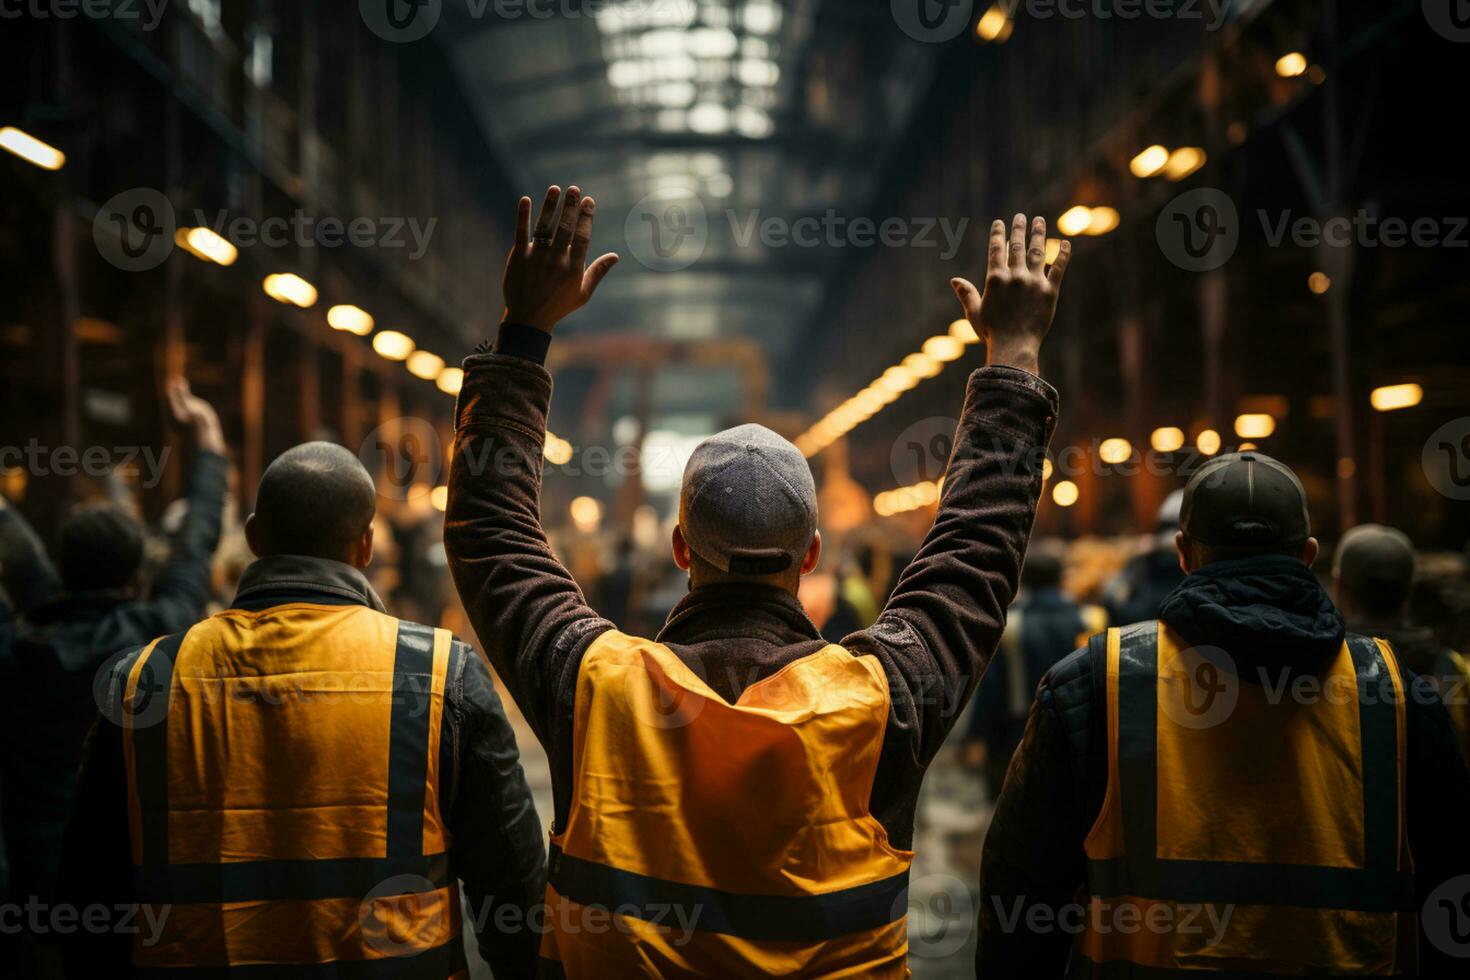 Constructions workers walking on the street celebrating photo